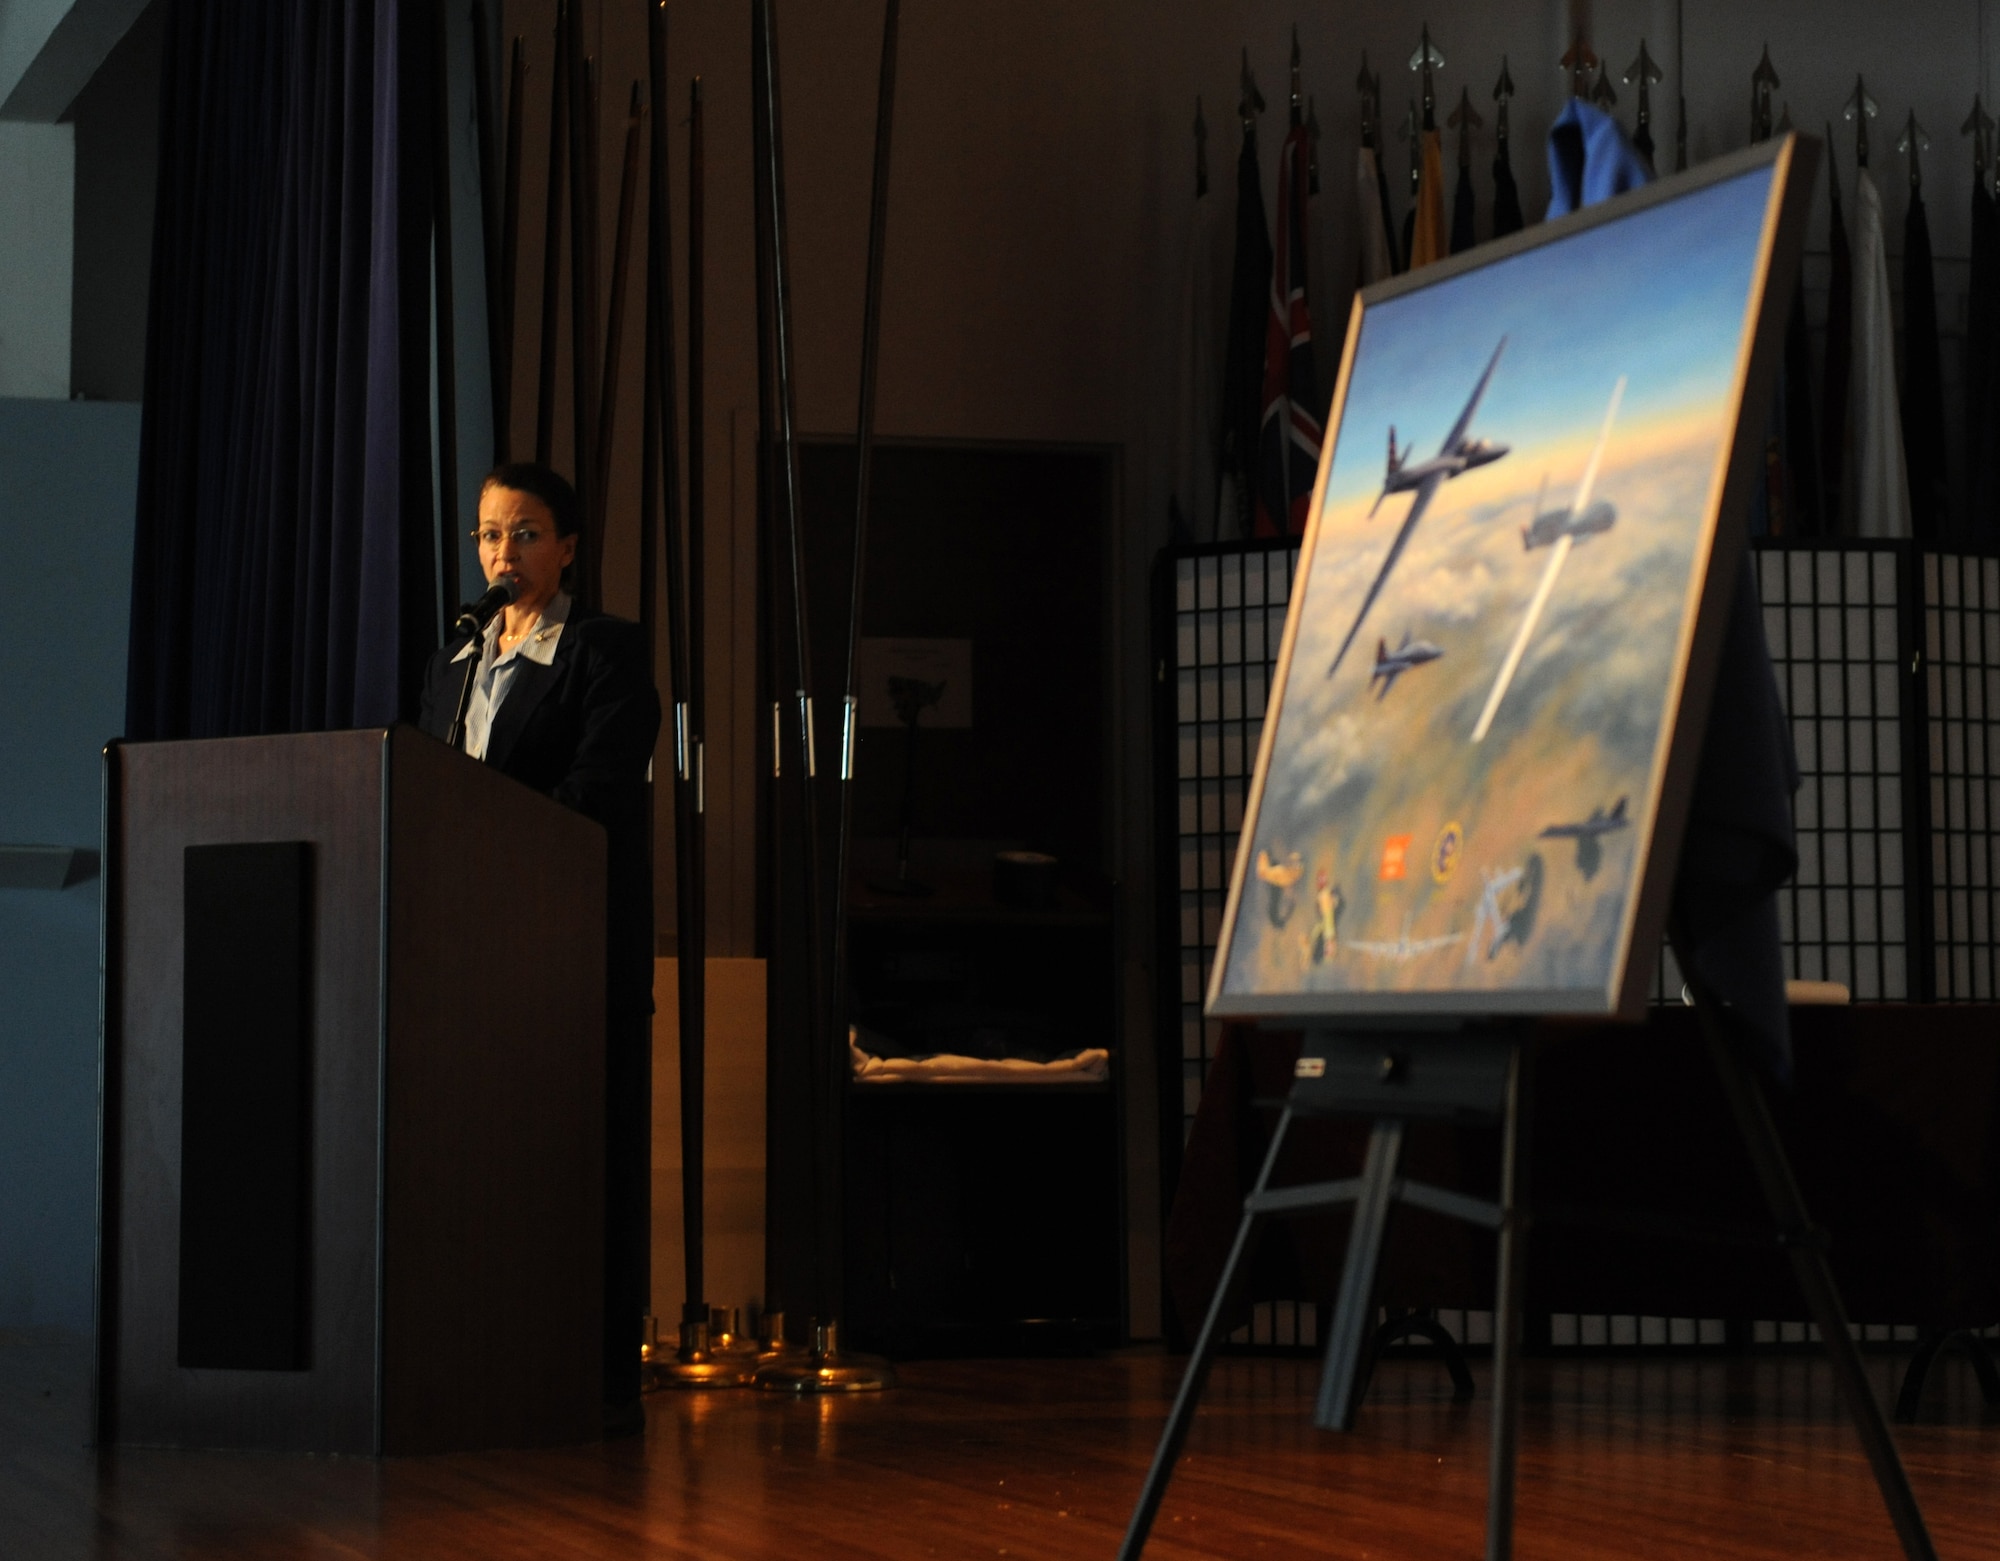 Aviation artist Kristin Hill speaks about her painting depicting the centennial of the 1st Reconnaissance Squadron at Beale Air Force Base, Calif., March 7, 2013. Hill has painted more than 250 aviation art paintings and has work featured in many international airports as well as the Pentagon. (U.S. Air Force photo by Staff Sgt. Robert M. Trujillo/Released)